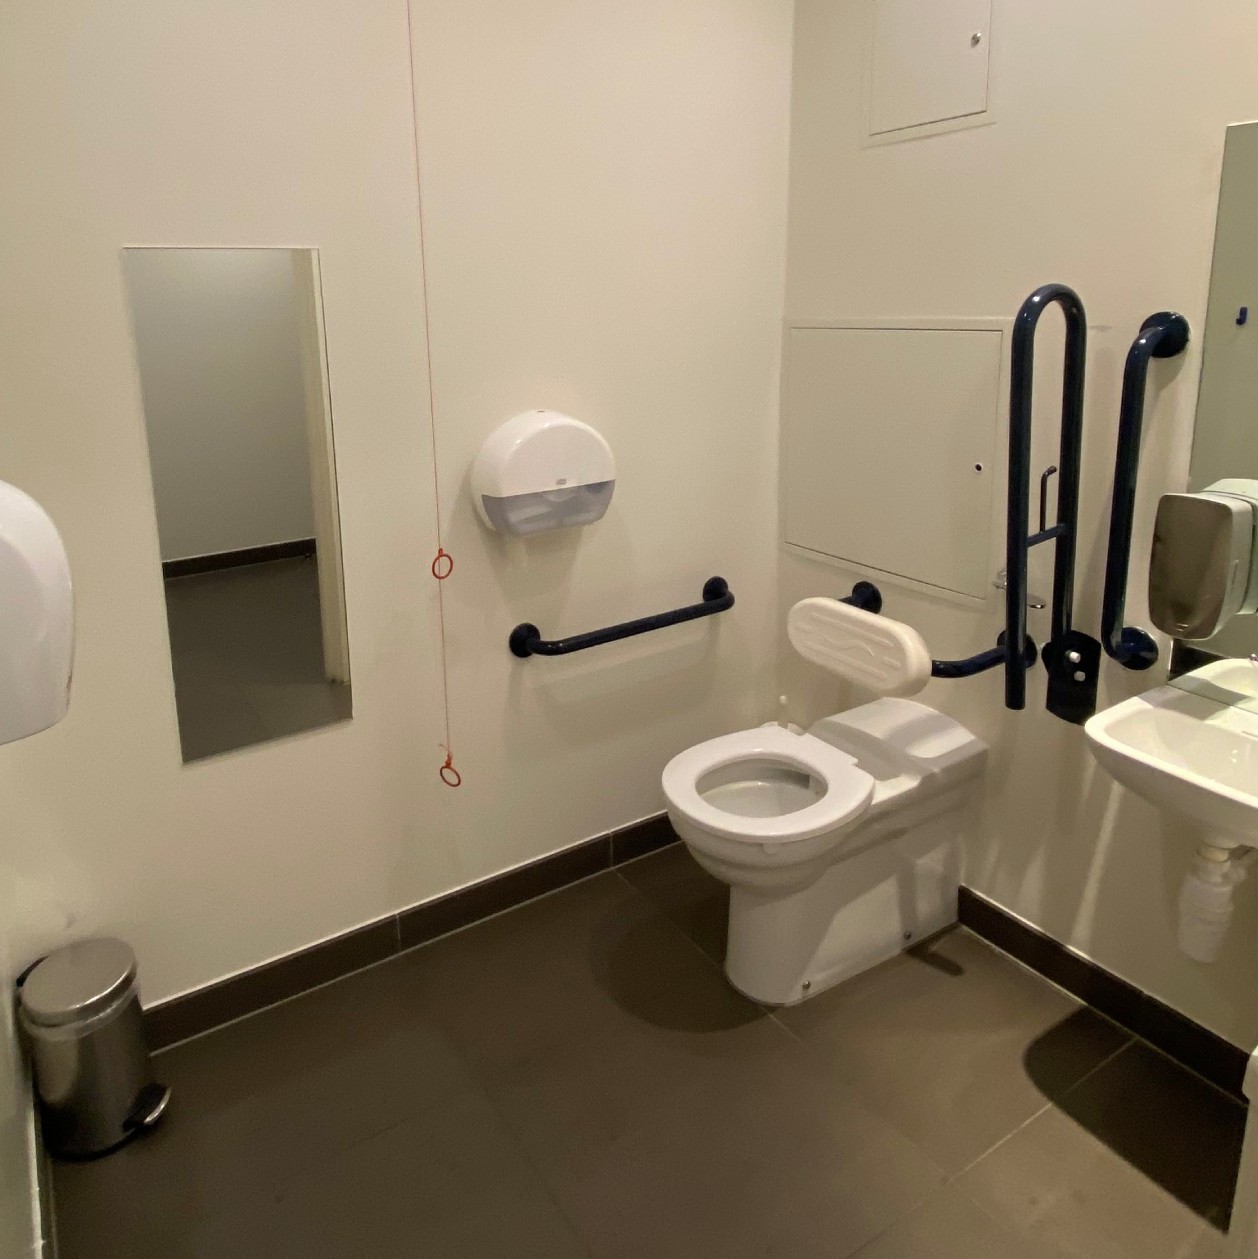 View of the accessible toilet with toilet, sink, mirror and hand dryer